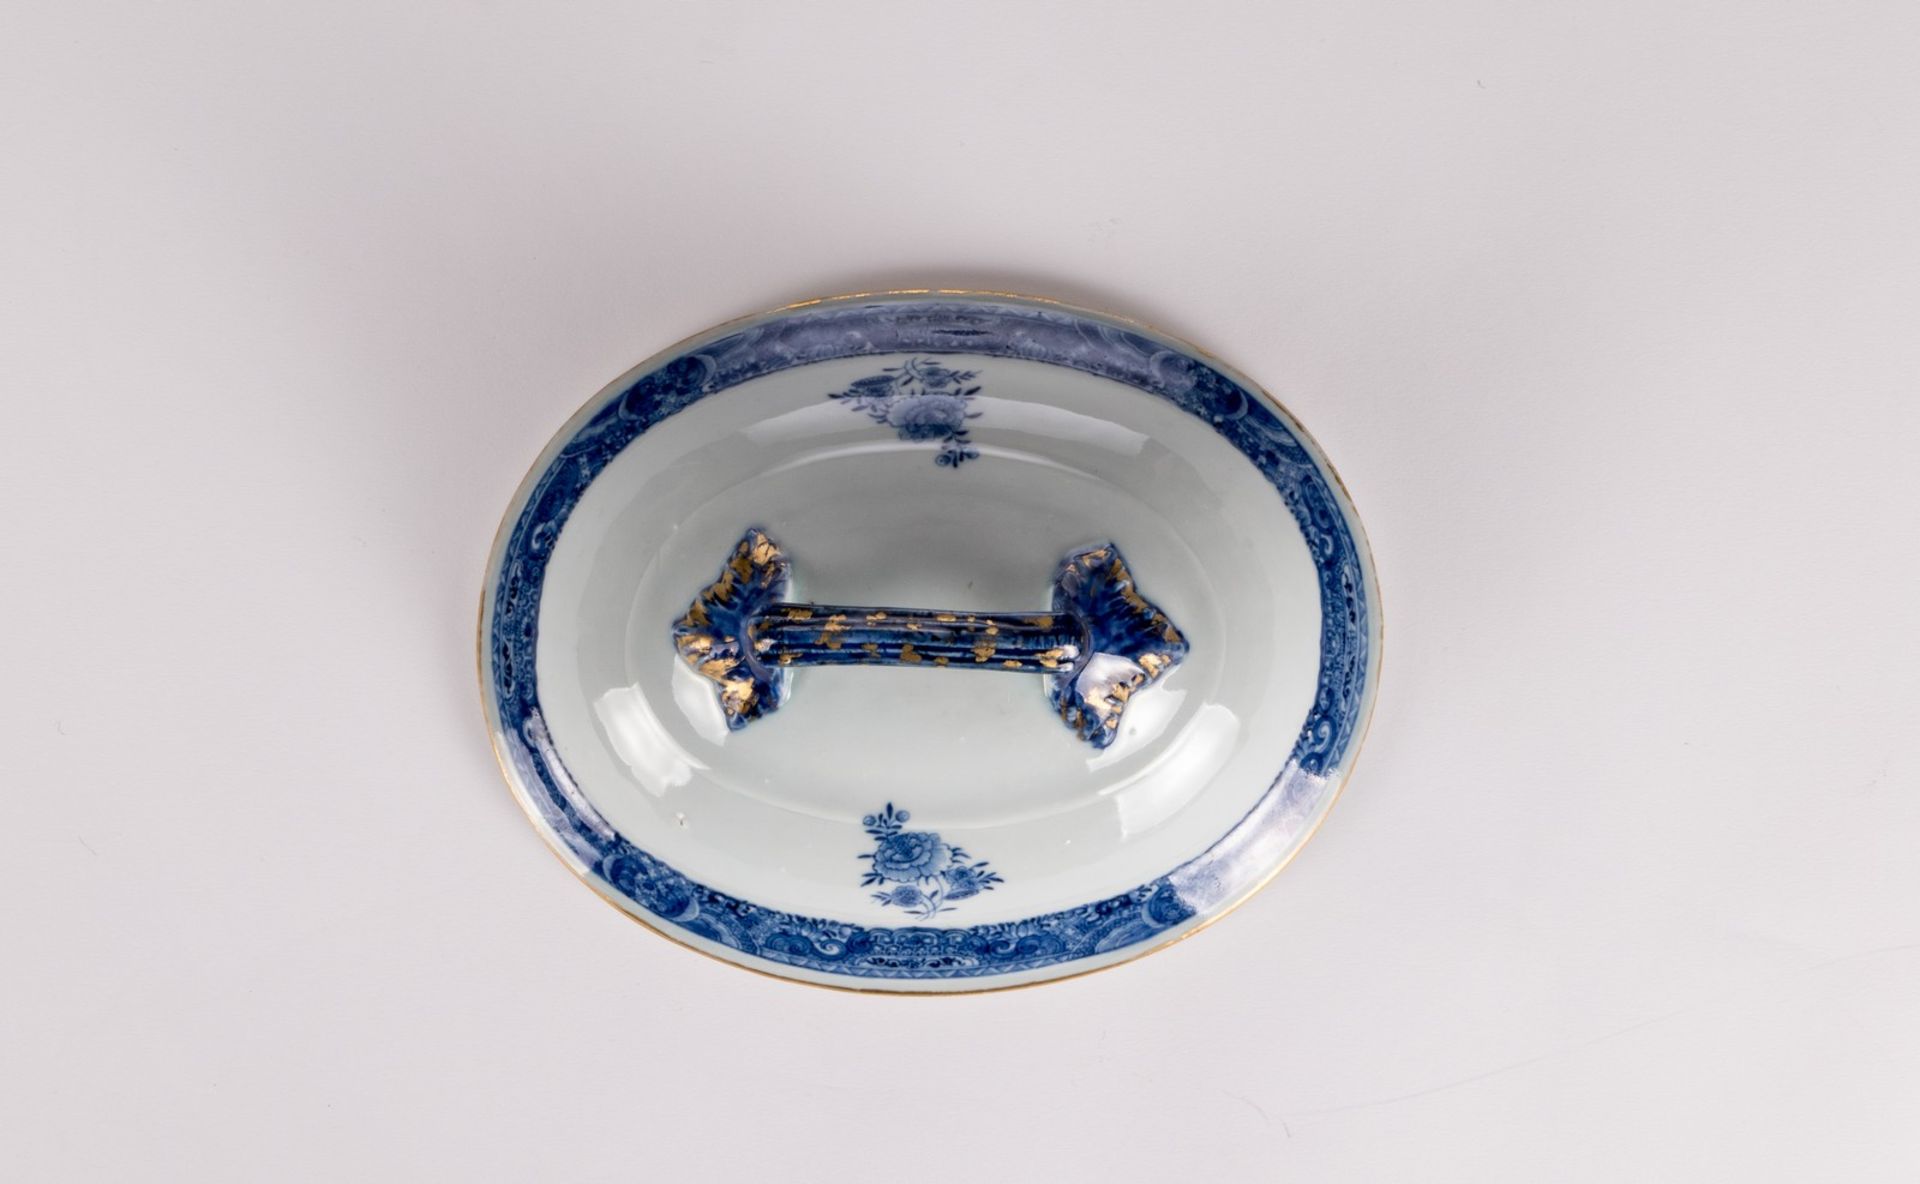 A Chinese blue and white and gilt decorated tureen on a matching plate with floral motives, 18thC; - Image 12 of 16